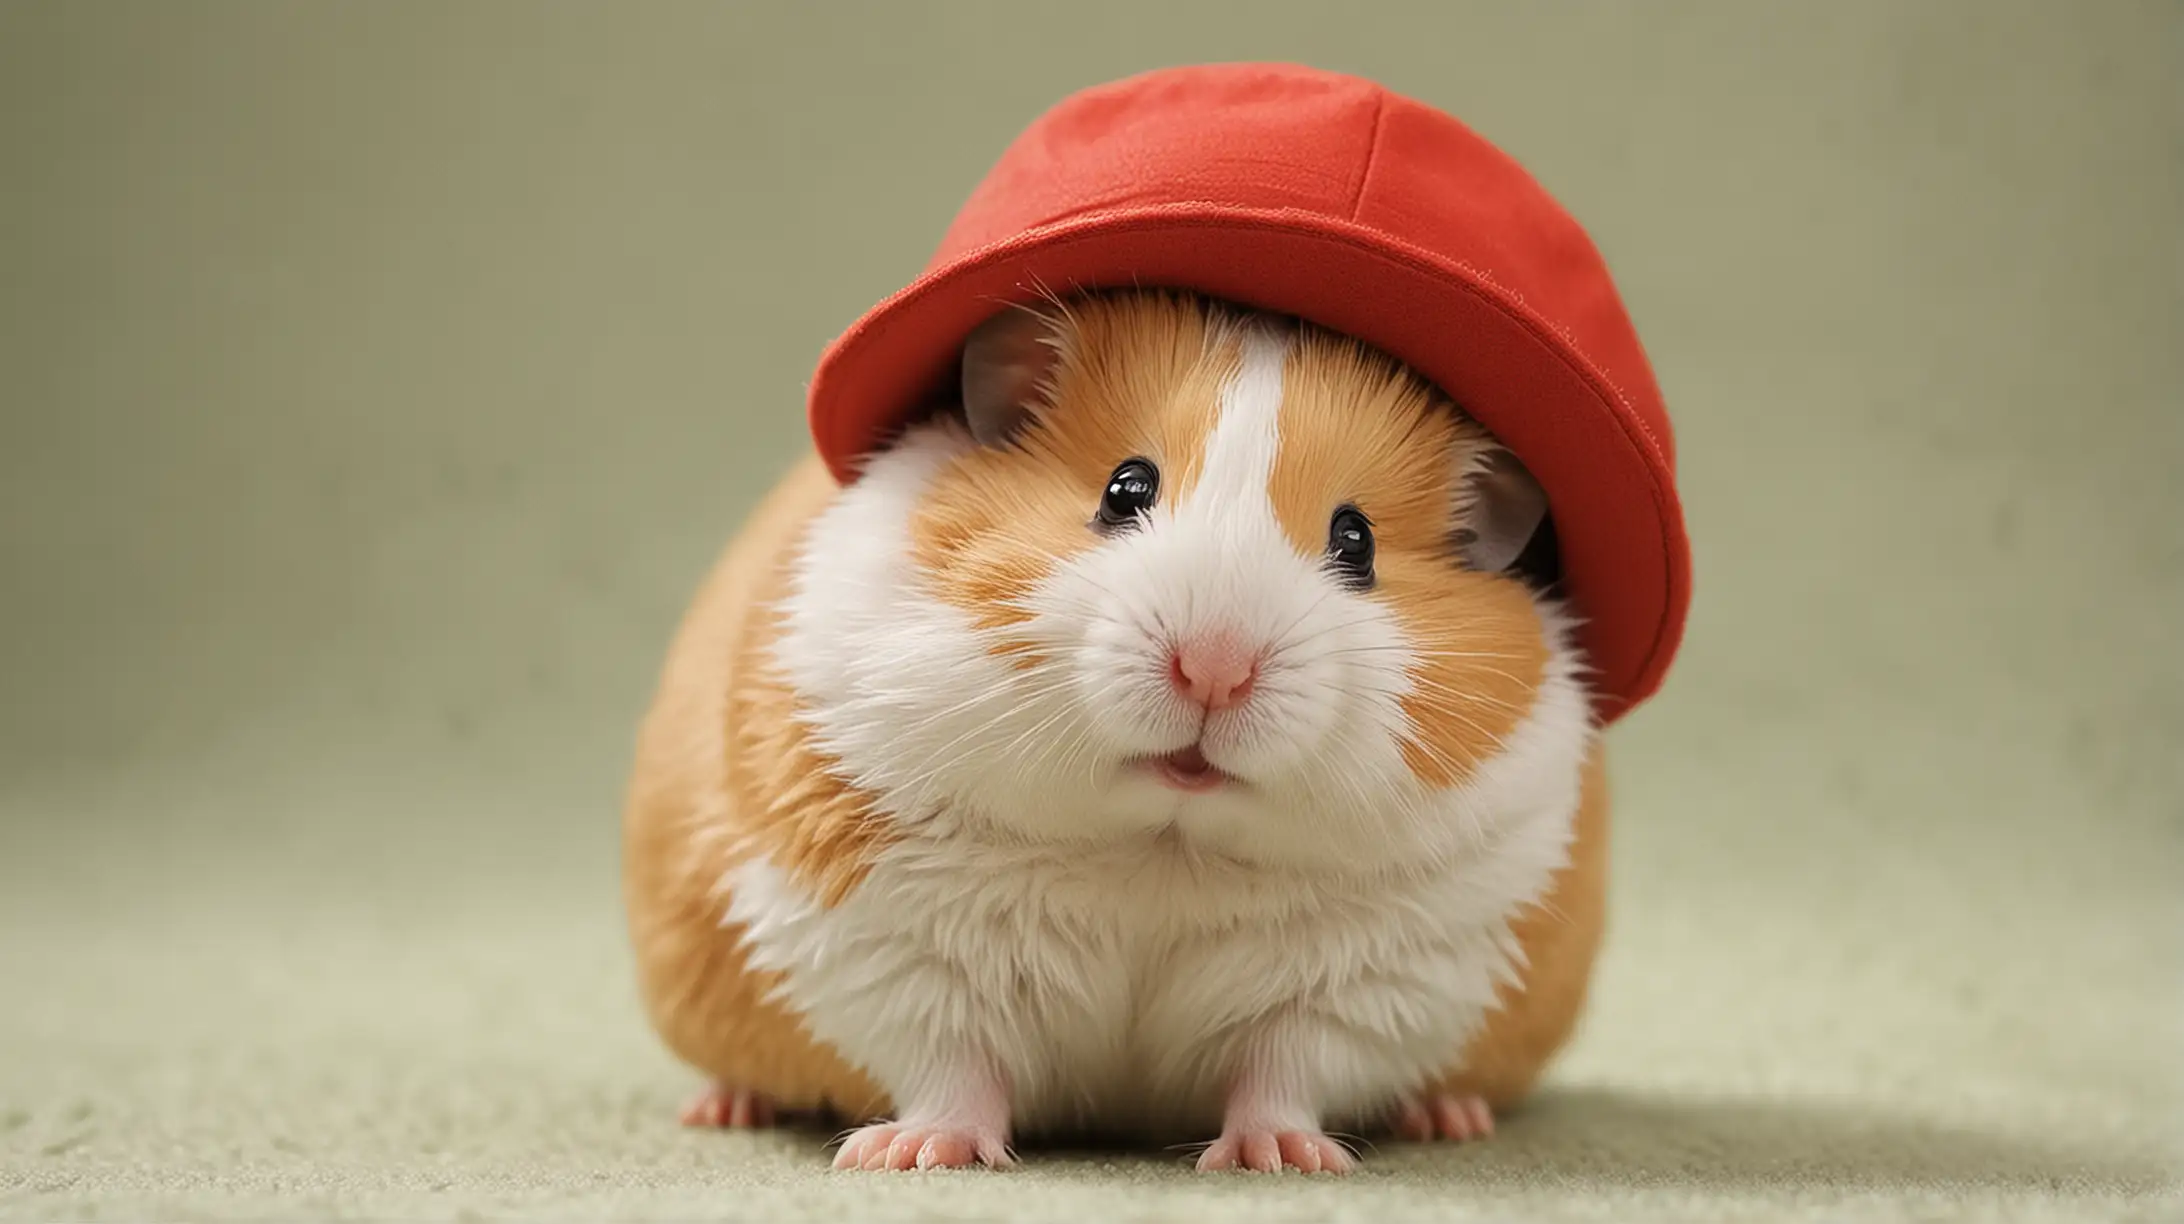 Adorable Hamster Wearing a Hat